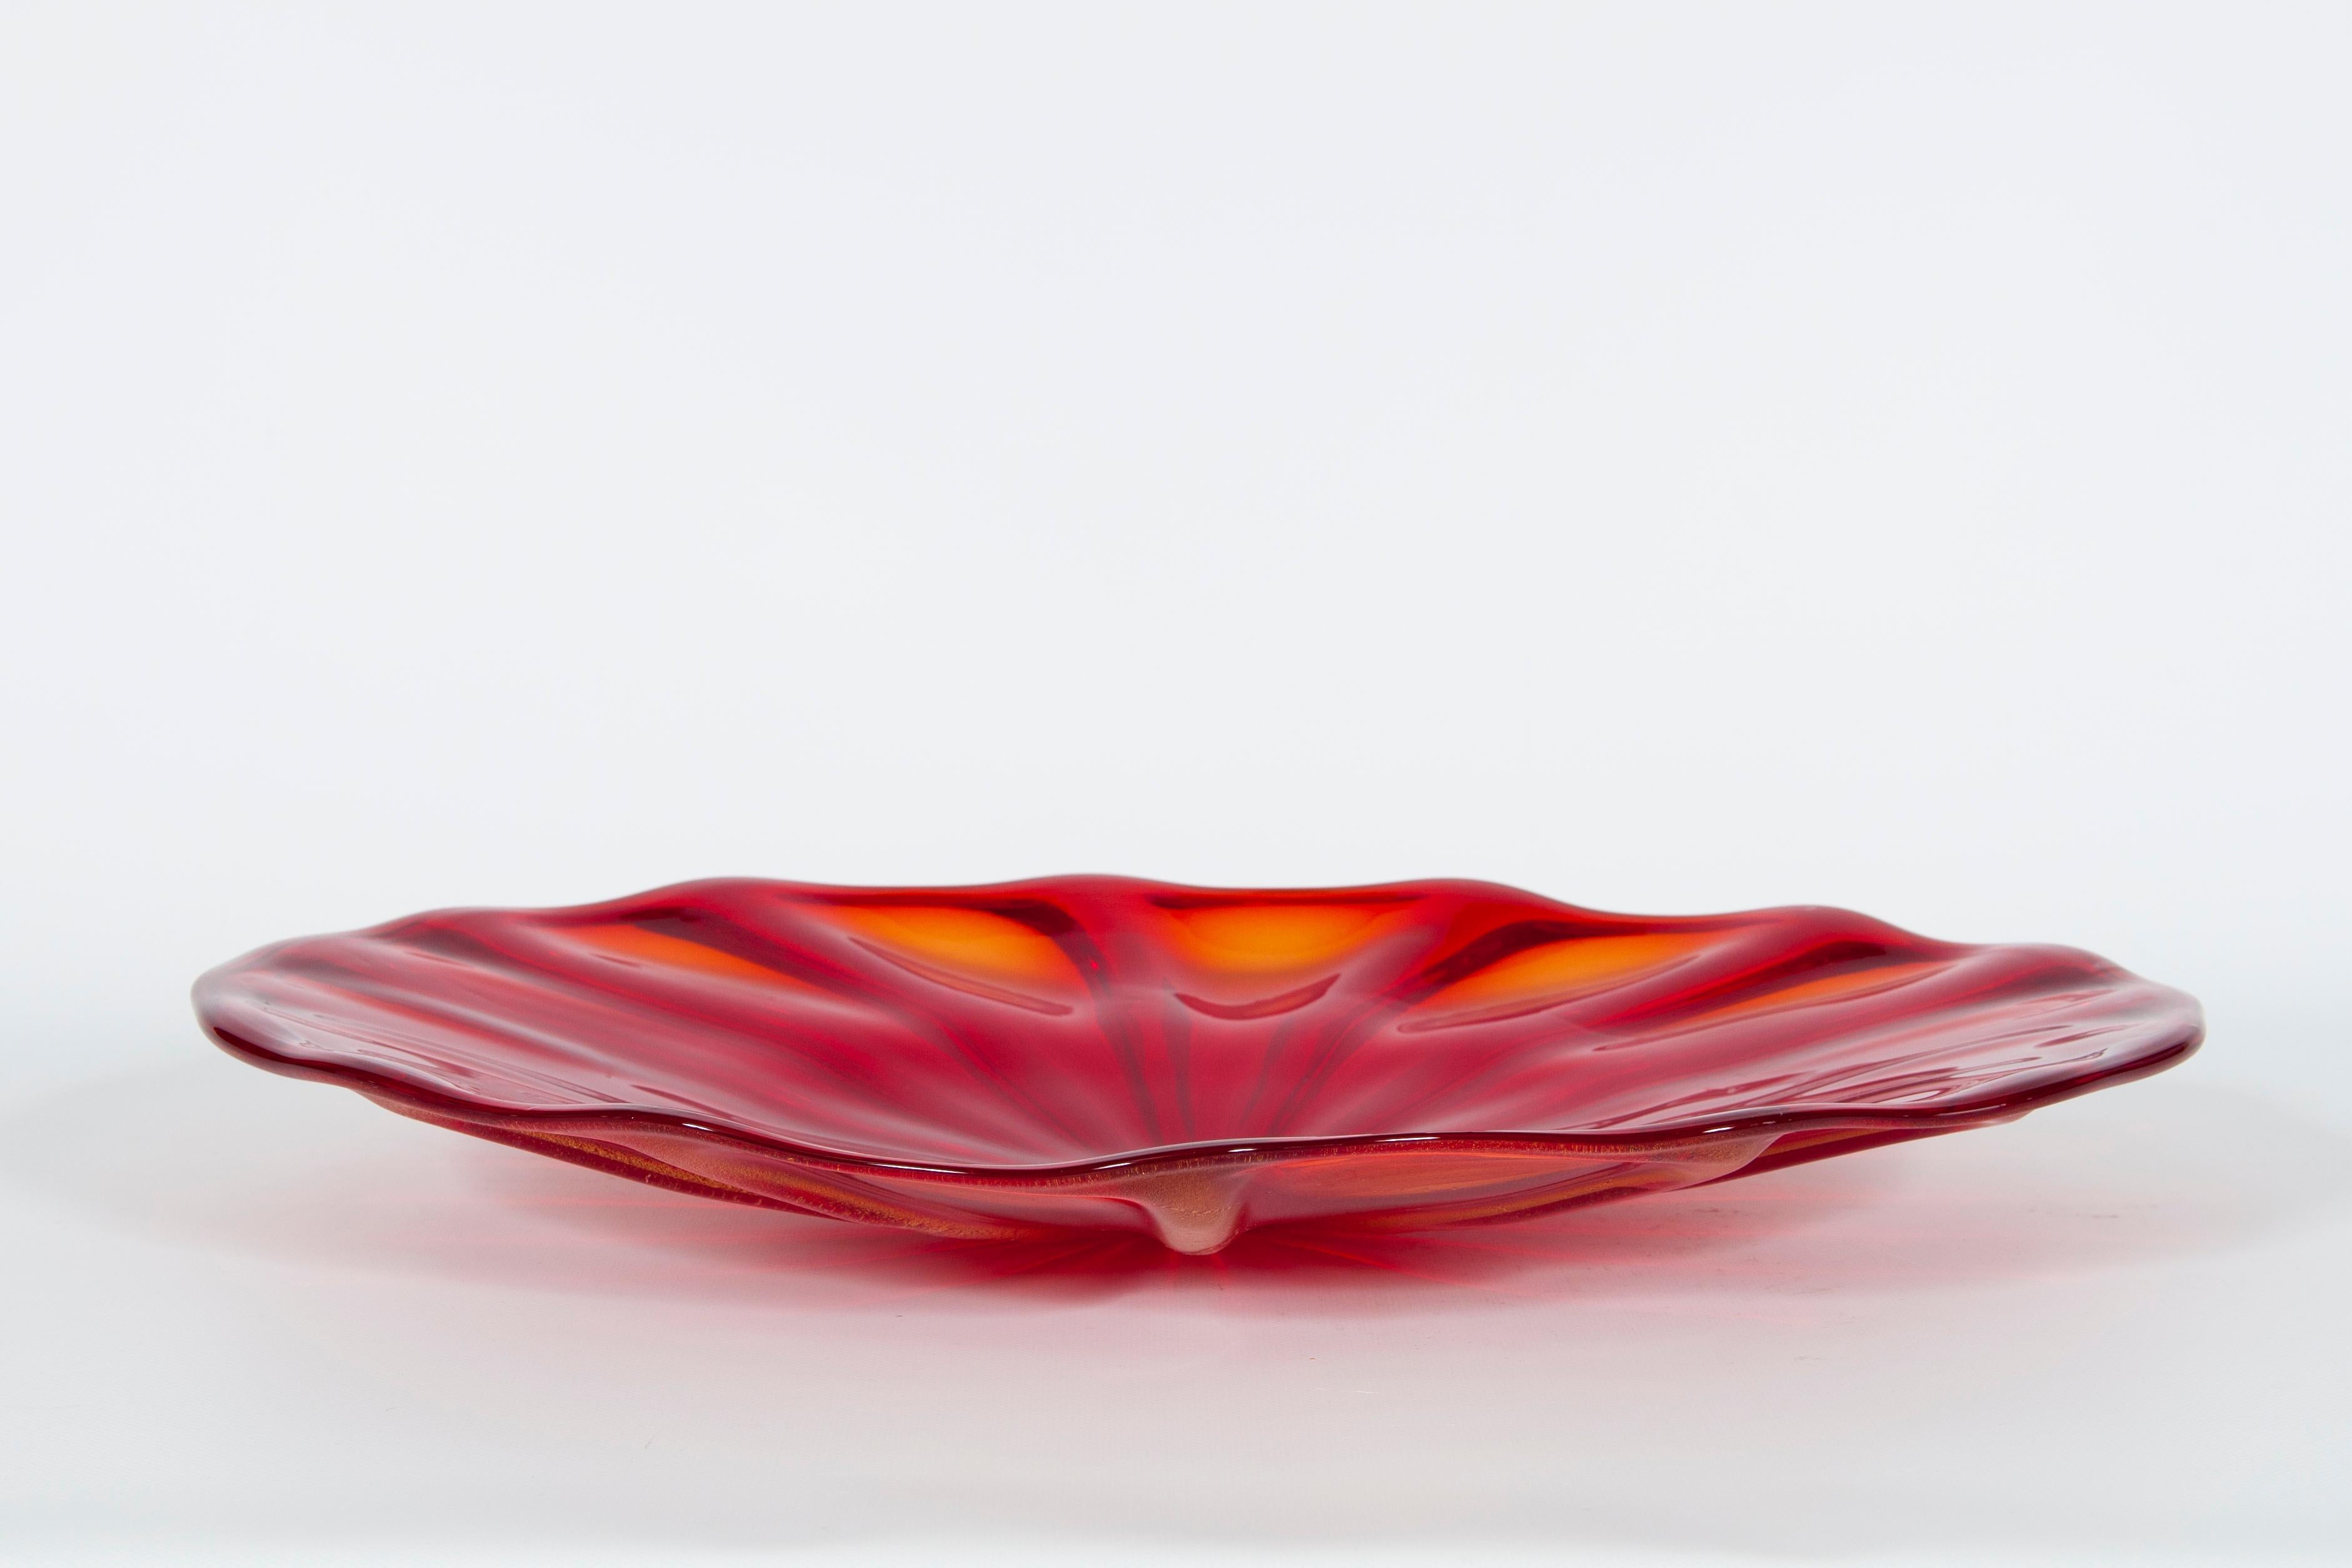 Italian Venetian red Murano glass centerpiece with submerged gold 2000s.
This outstanding piece of art will bring a true touch of Venetian beauty into your home, and it can be used either as a functional or as a decorative object, according to your